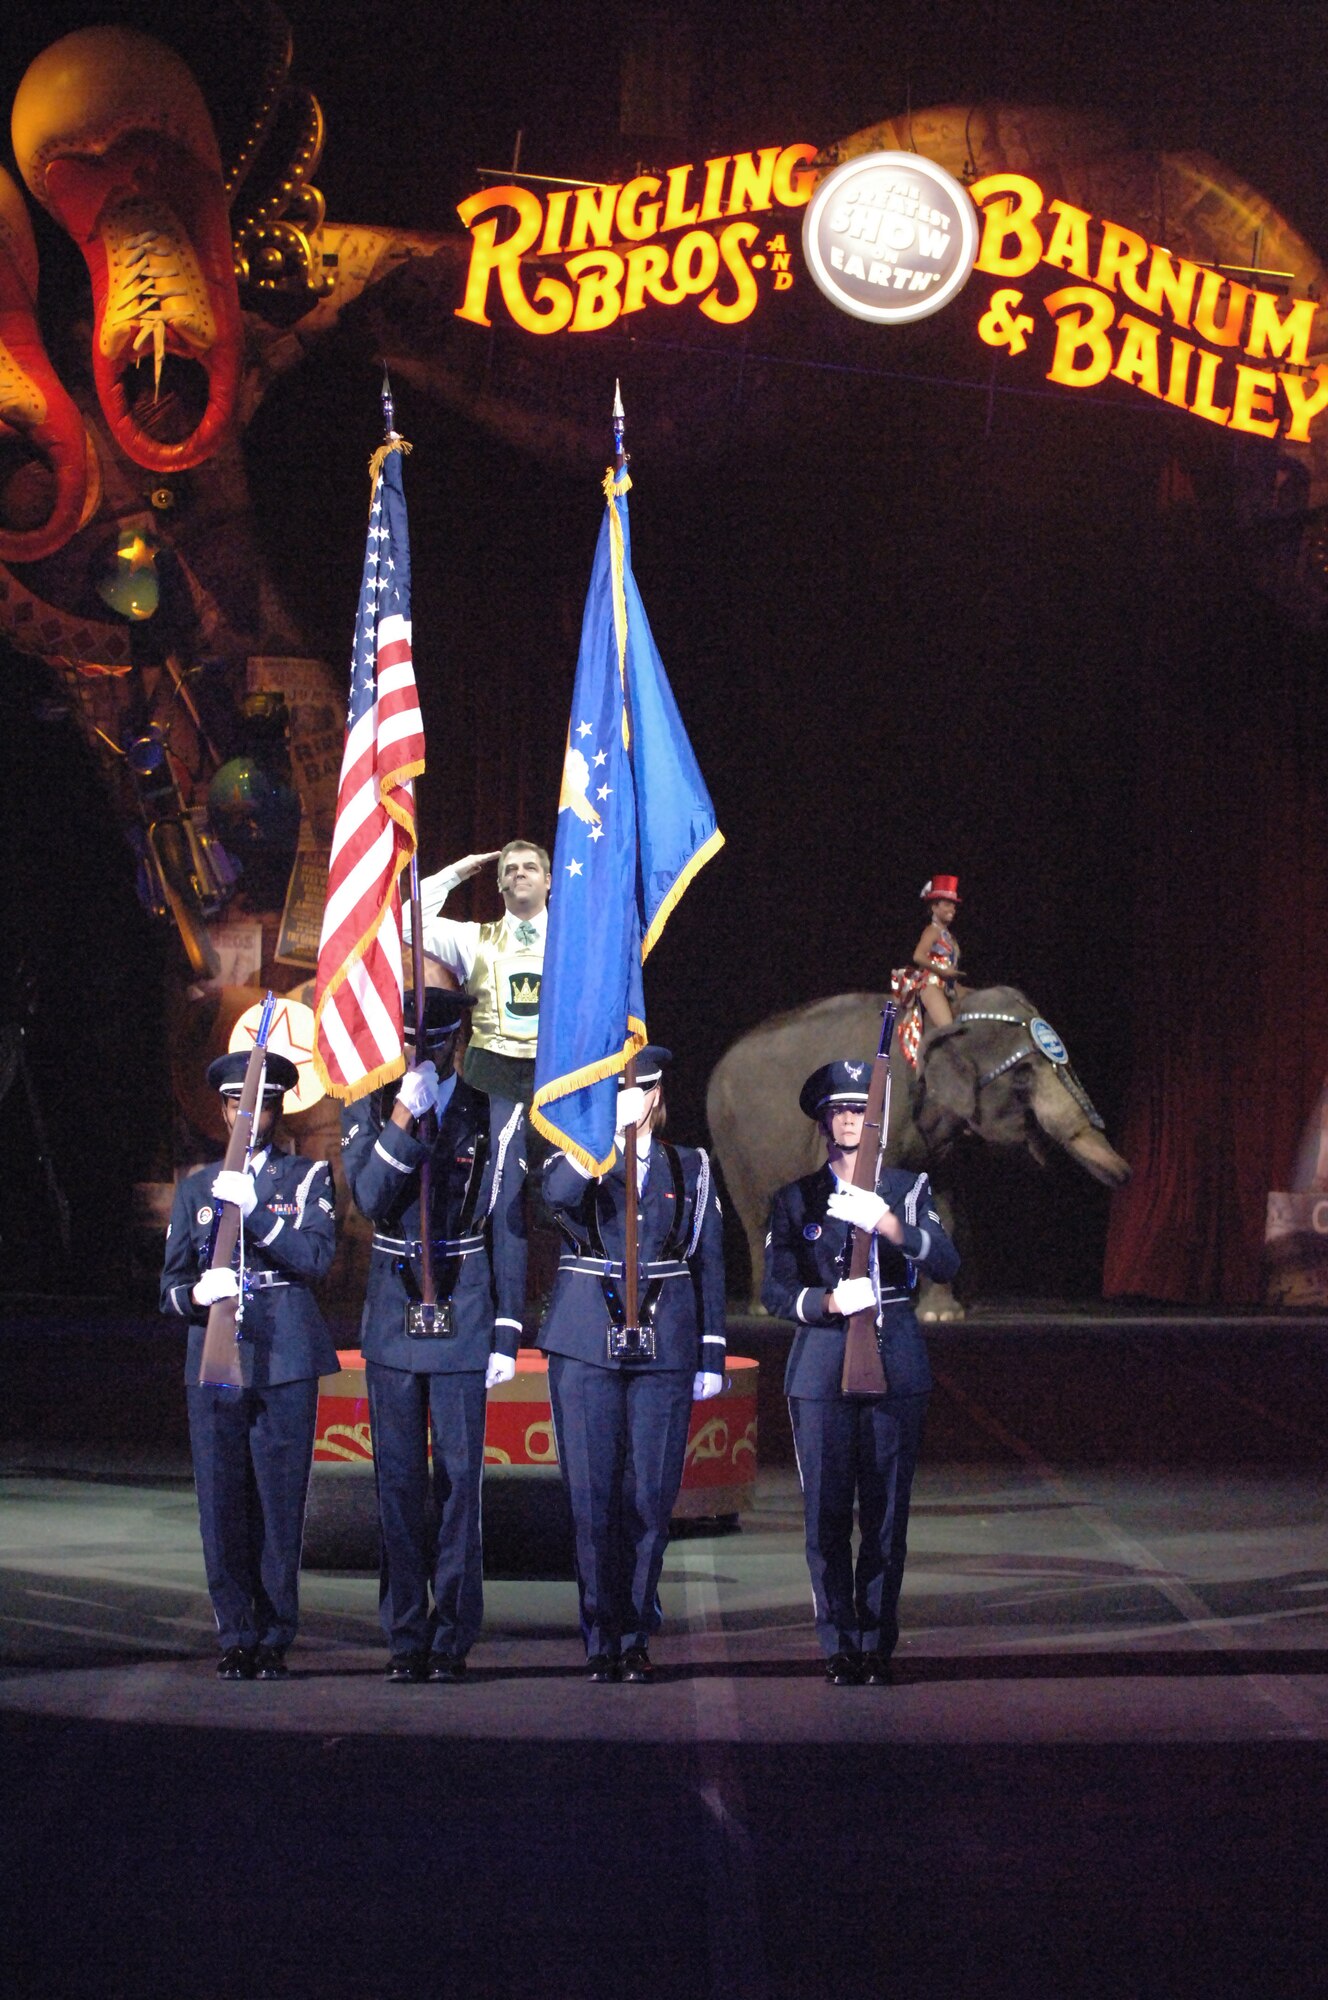 Members of the Macdill AFB Honor Guard present the colors as the Ringmaster Chuck Wagner performs the National Anthem during the Ringling Bros. and Barnum & Bailey Circus at the St. Pete Times Forum in Tampa, Fla, Jan 4.  (U.S. Air Force photo by Staff Sgt. Joseph Swafford, Jr.)(Released)